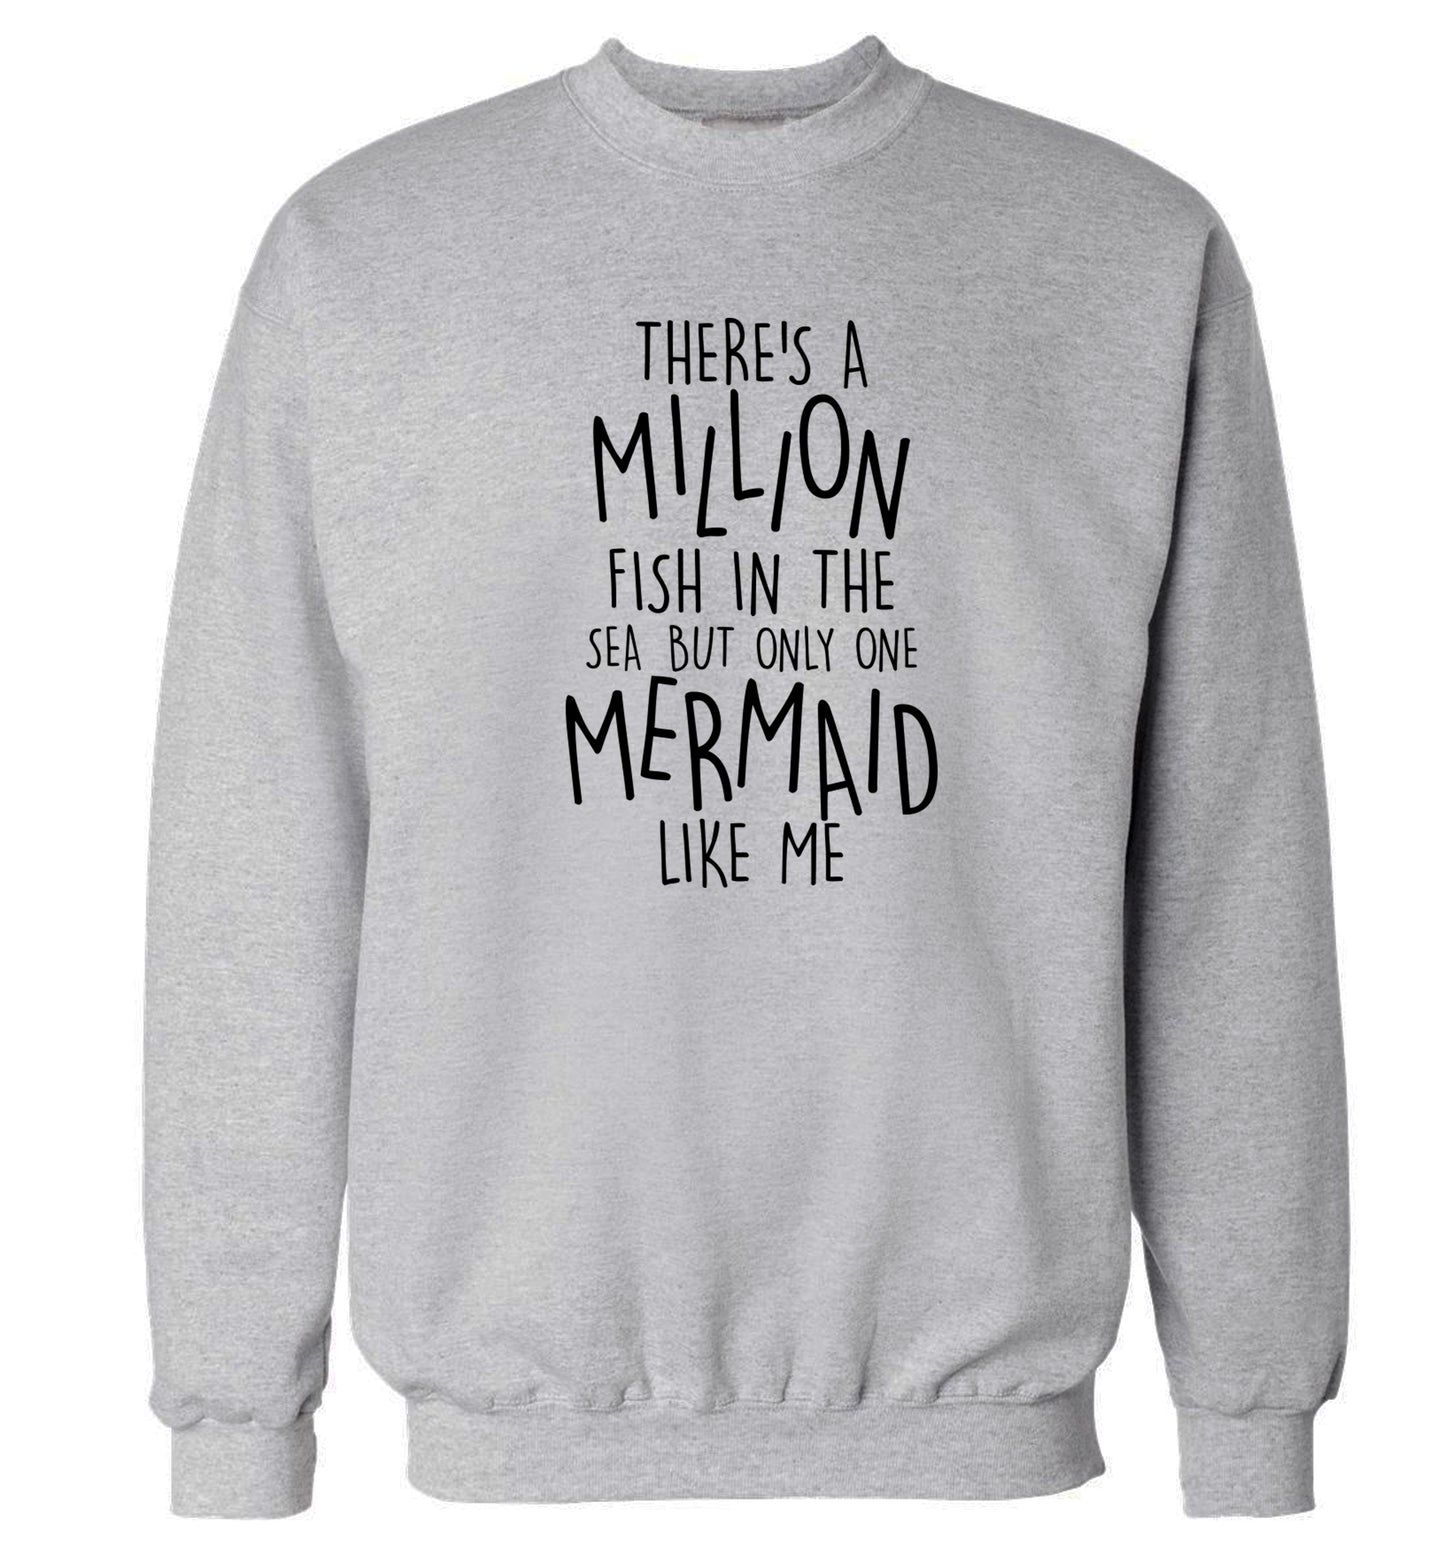 There's a million fish in the sea but only one mermaid like me Adult's unisex grey Sweater 2XL